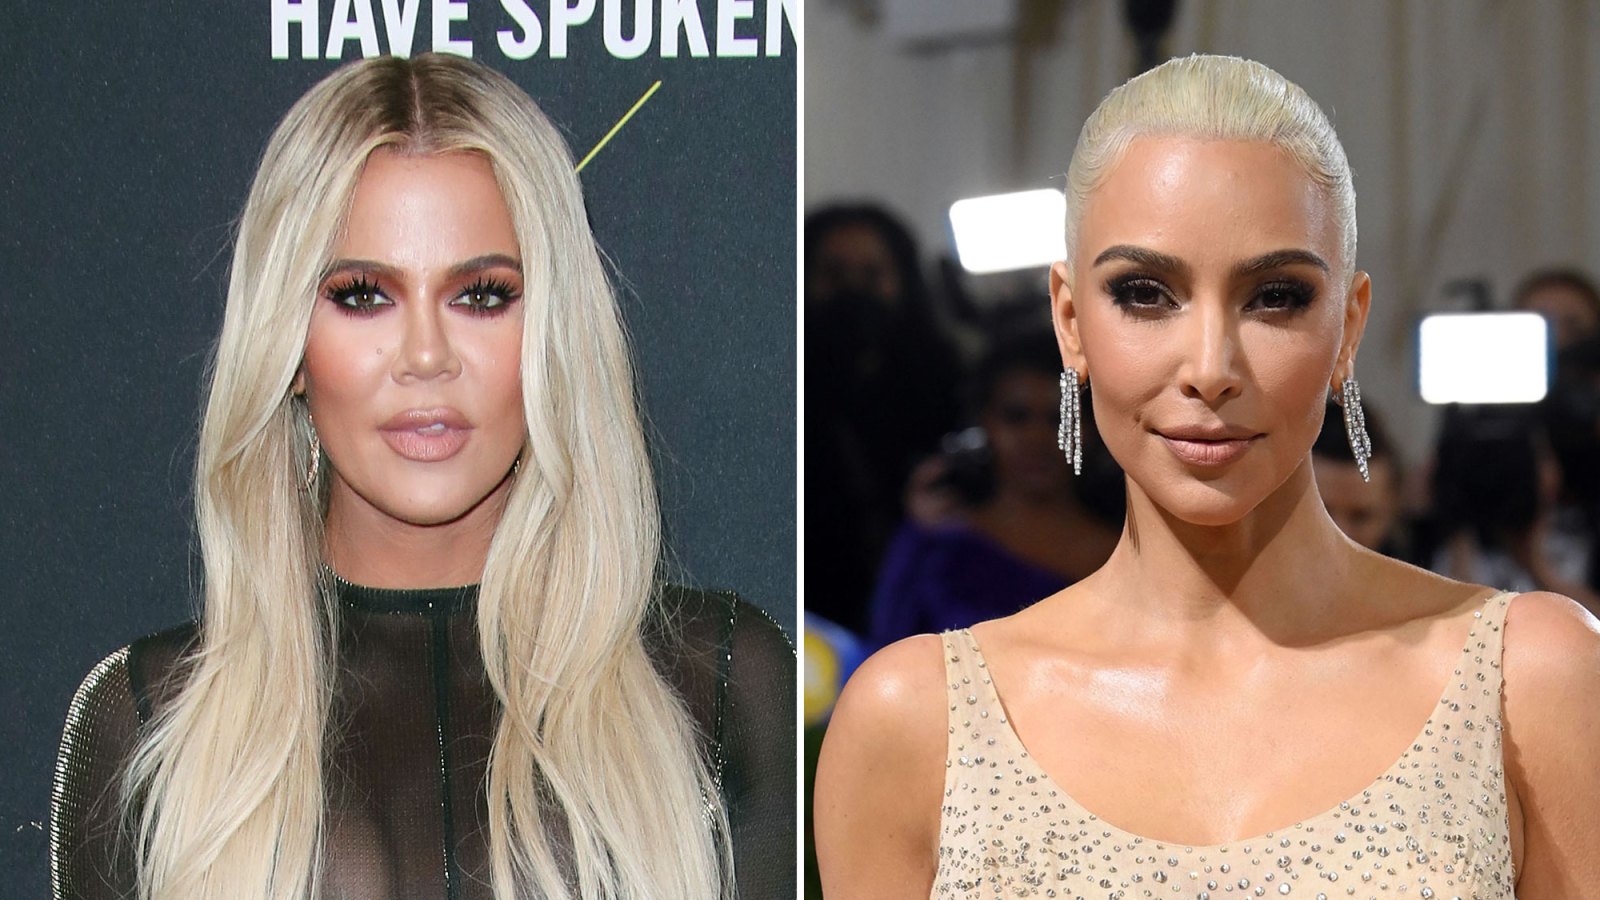 Khloe Kardashian Jokes Sisters Were So Mad She Ate Ice Cream in Met Gala Fitting Amid Kims Weight Loss Controversy